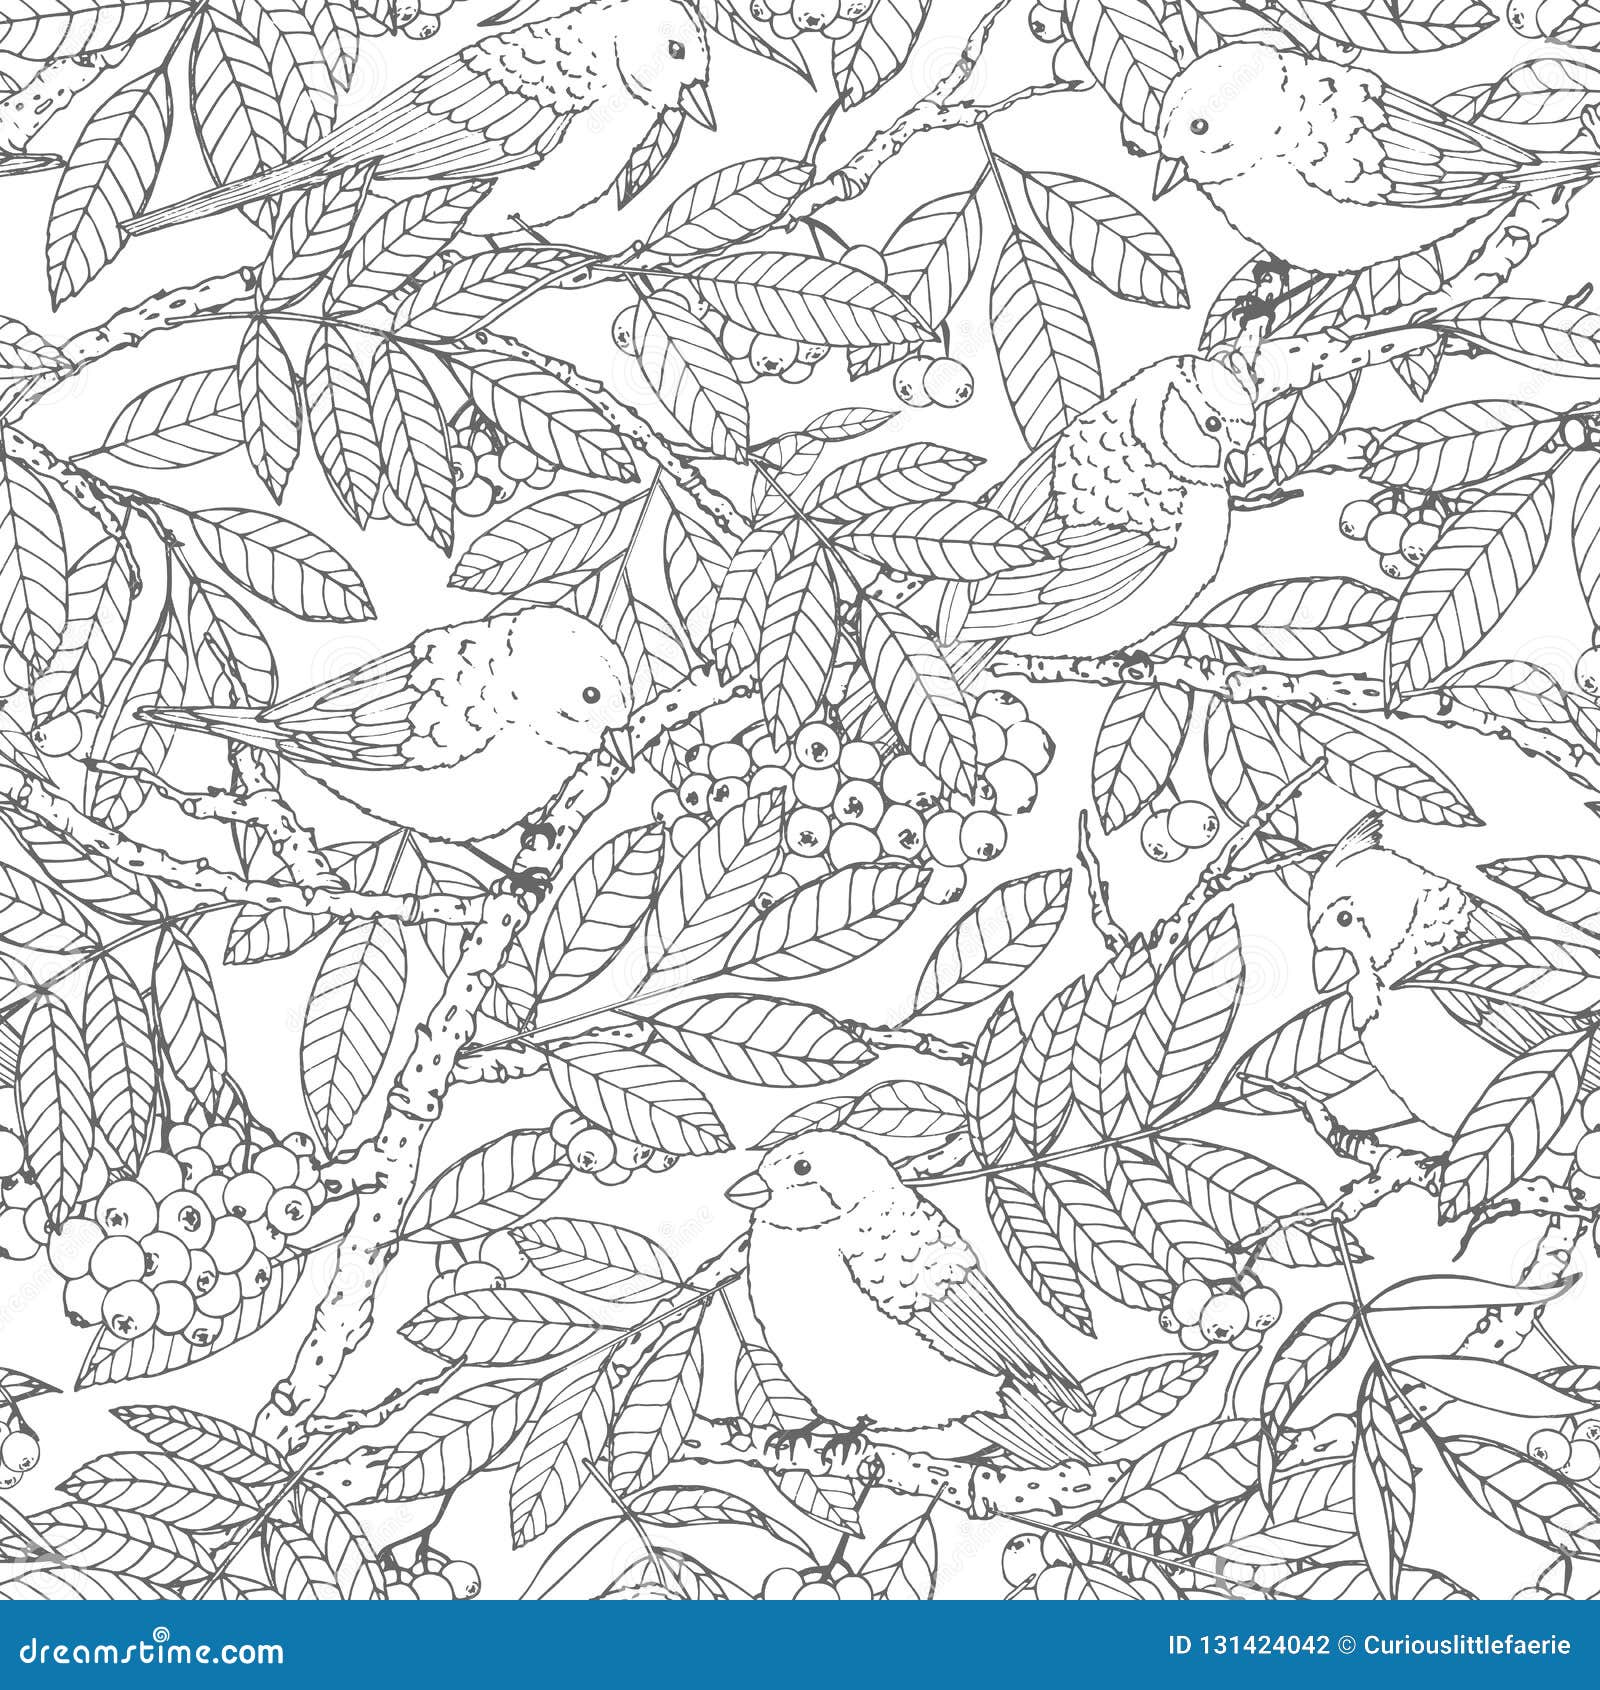 hand drawn  seamless pattern with birds, branches, leaves and rowanberry outline on white background. for coloring book